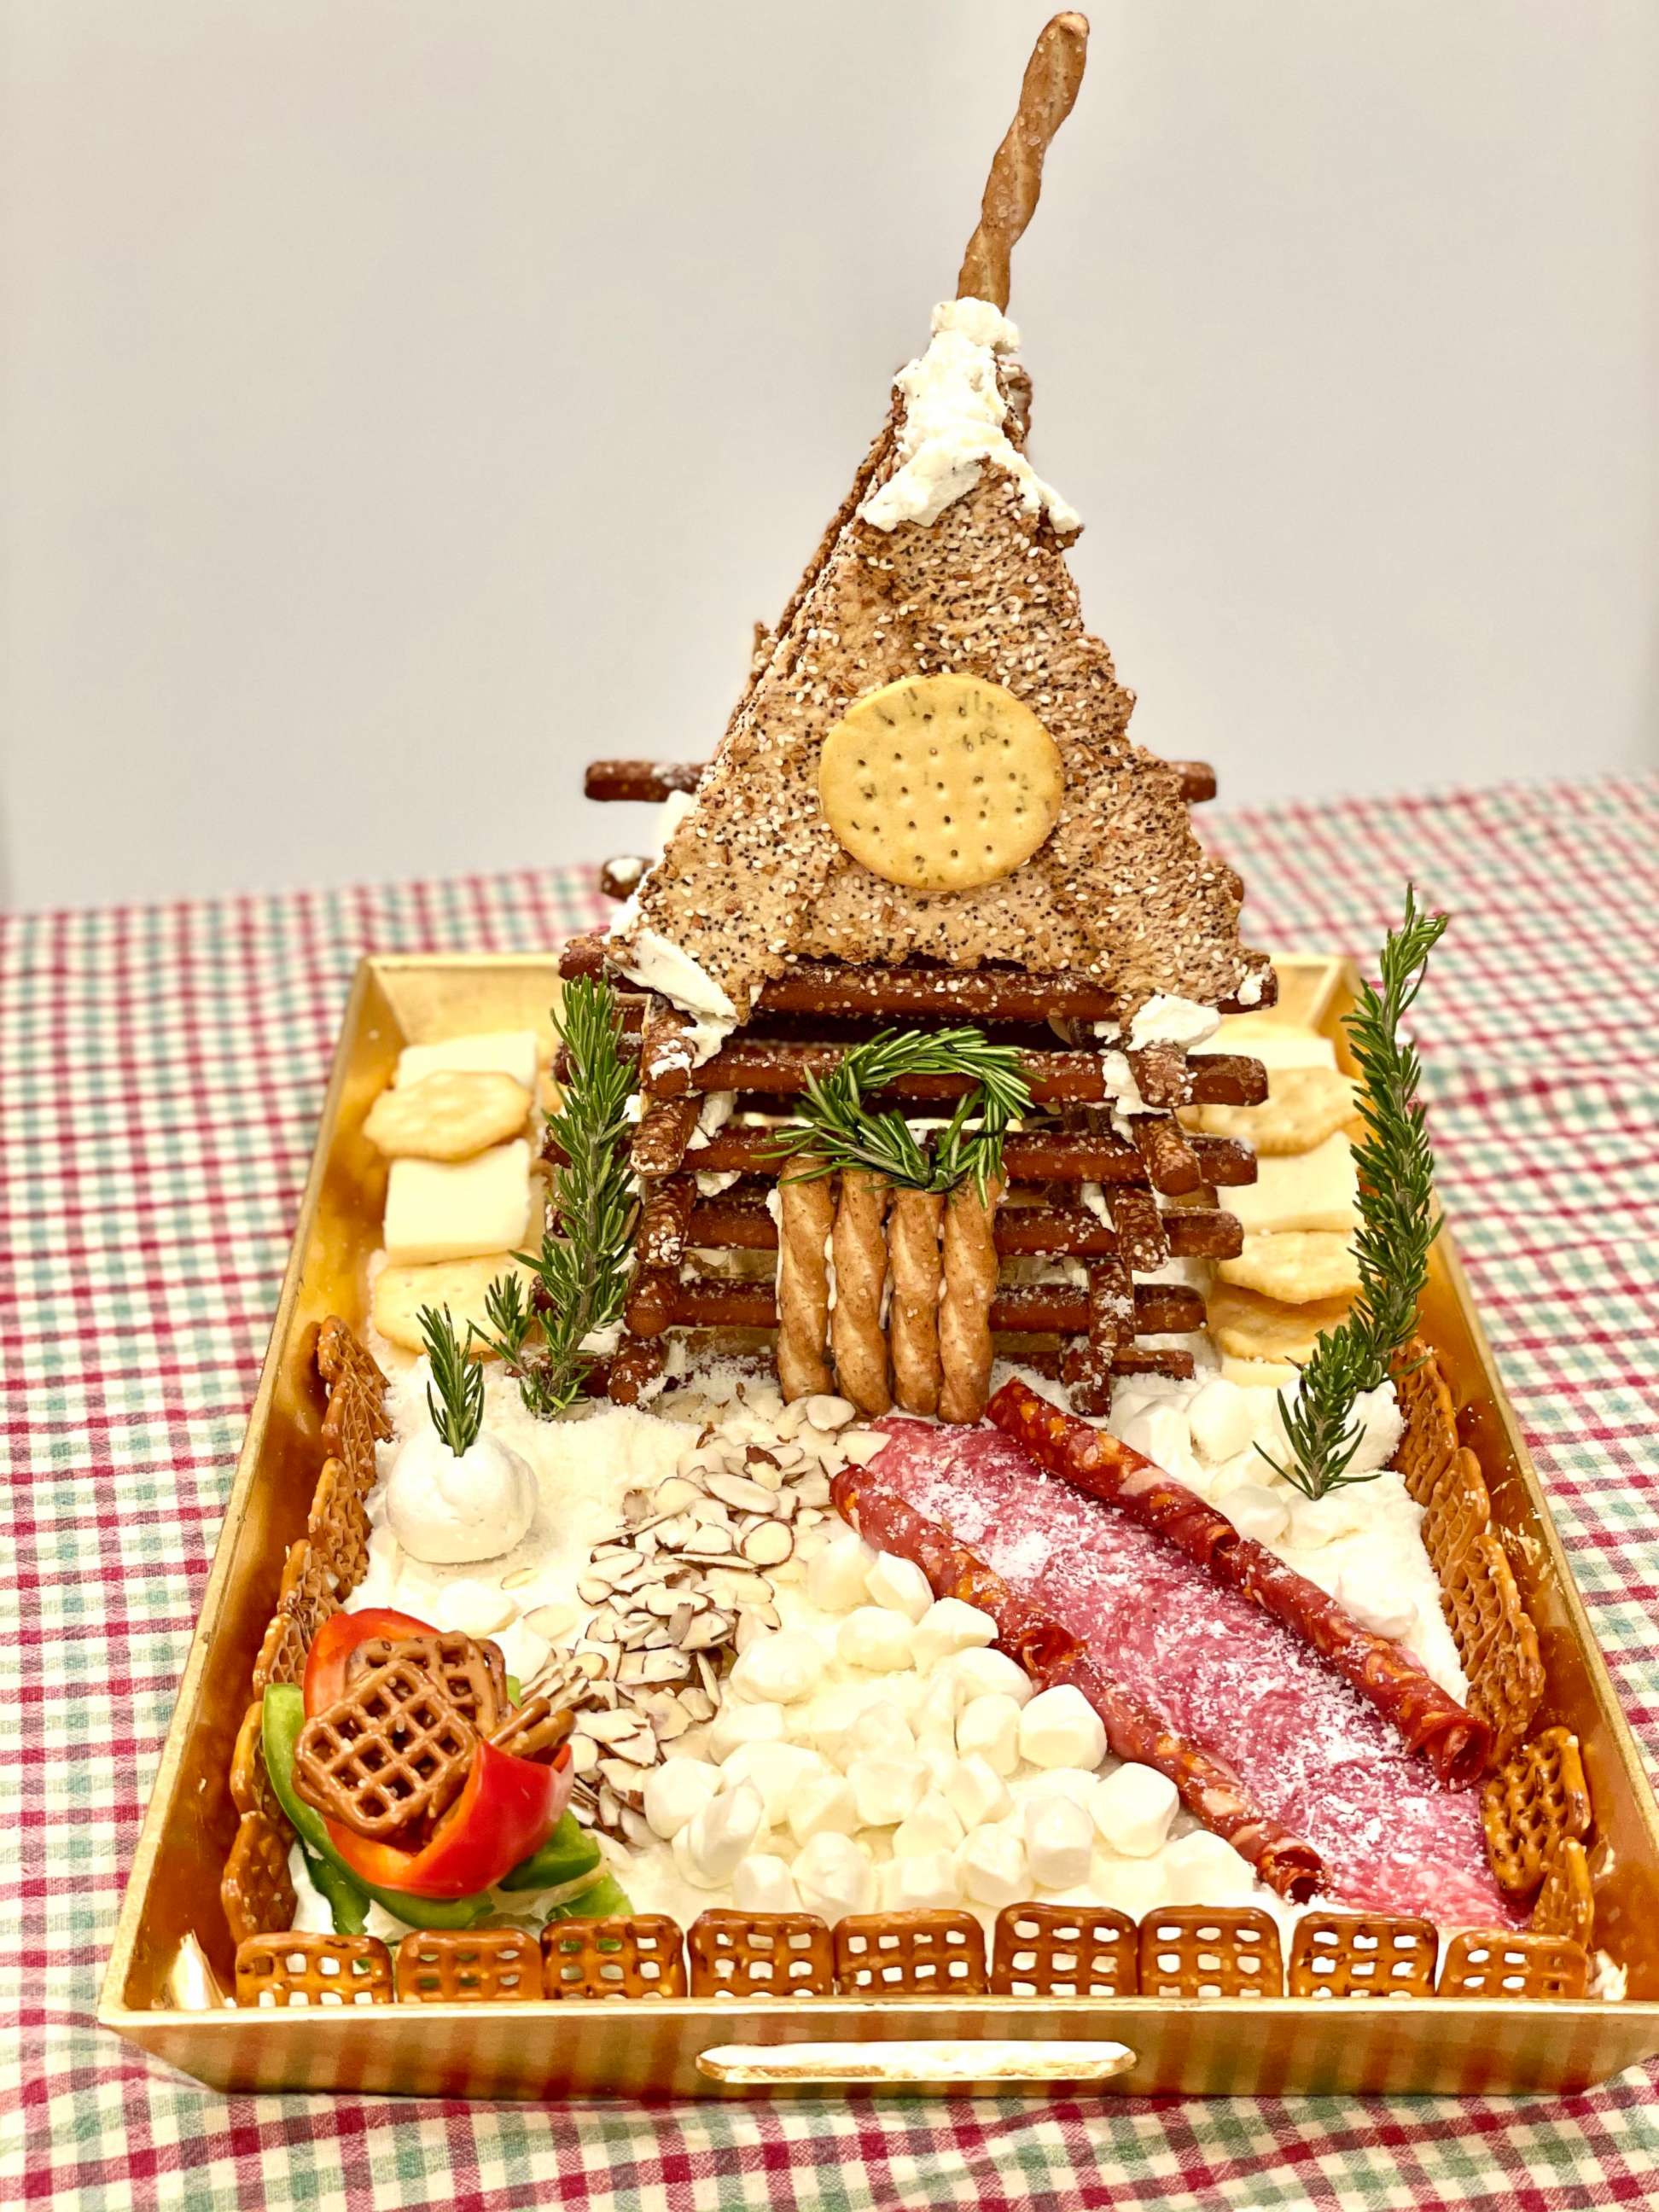 PHOTO: We built a 'charcuterie chalet' - the trending new twist to the traditional gingerbread house.